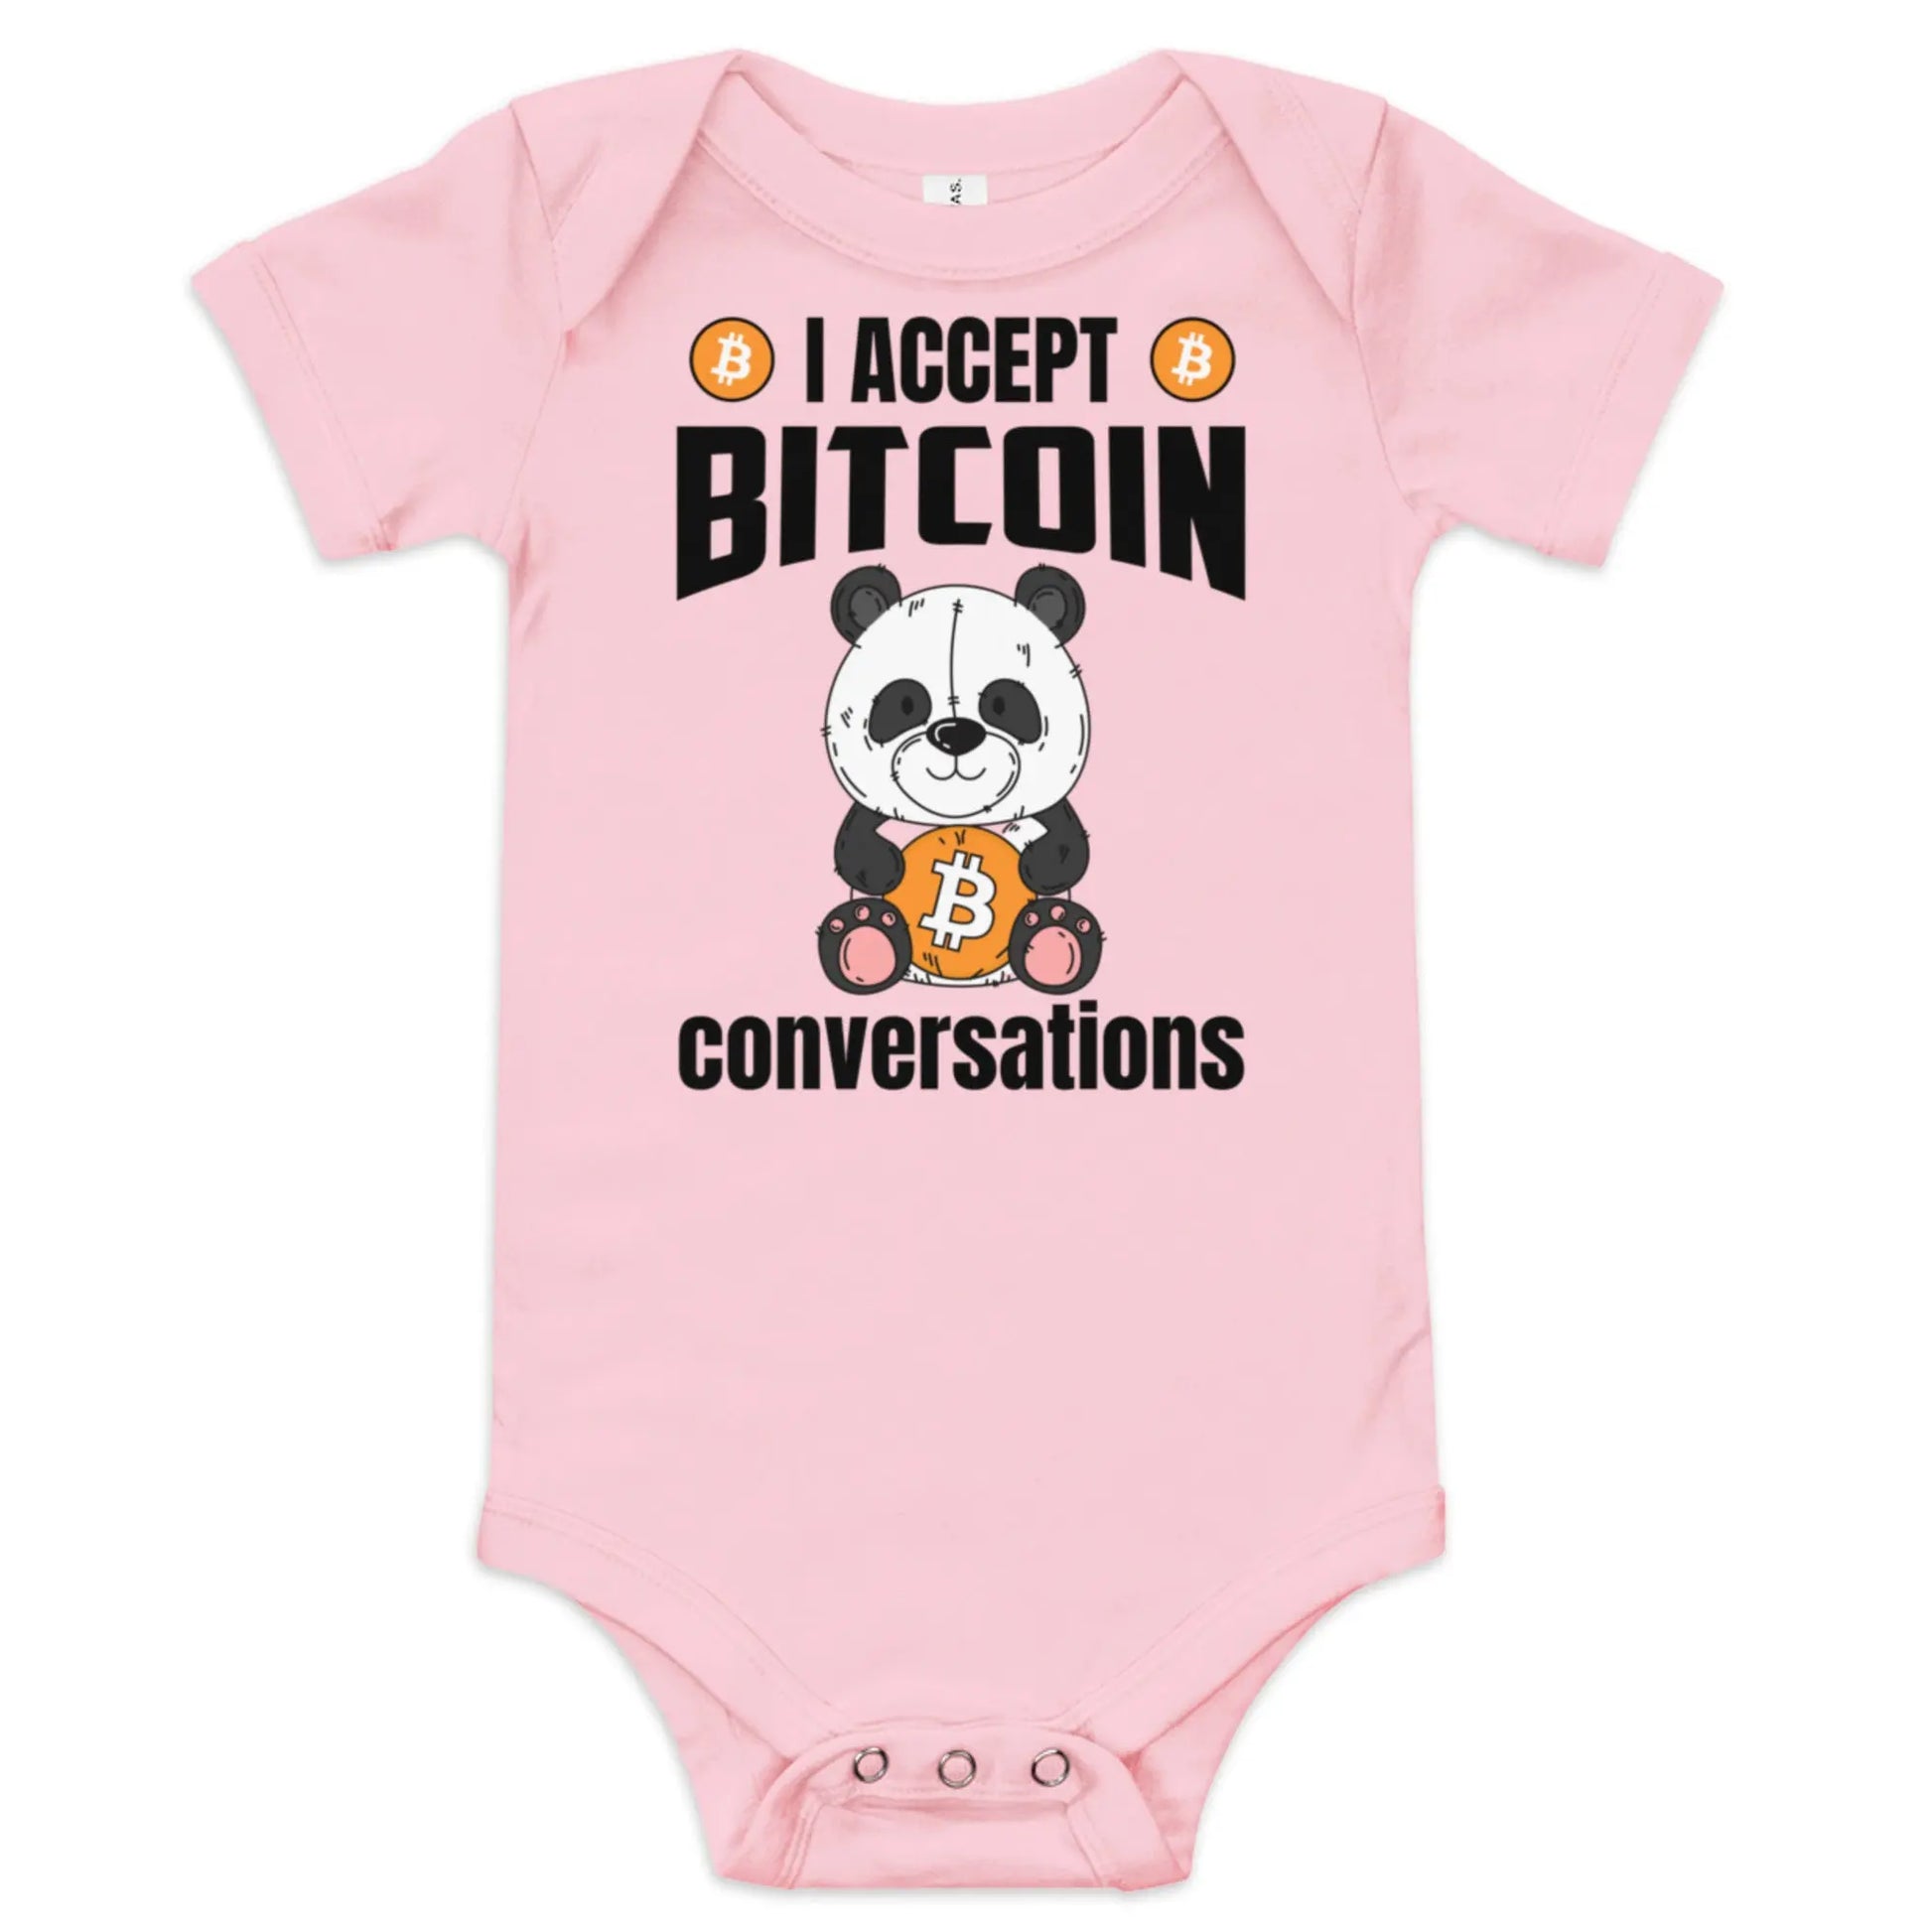 I Accept Bitcoin Conversations - Baby Bitcoin Body Suit - One Piece with Short Sleeve Pink